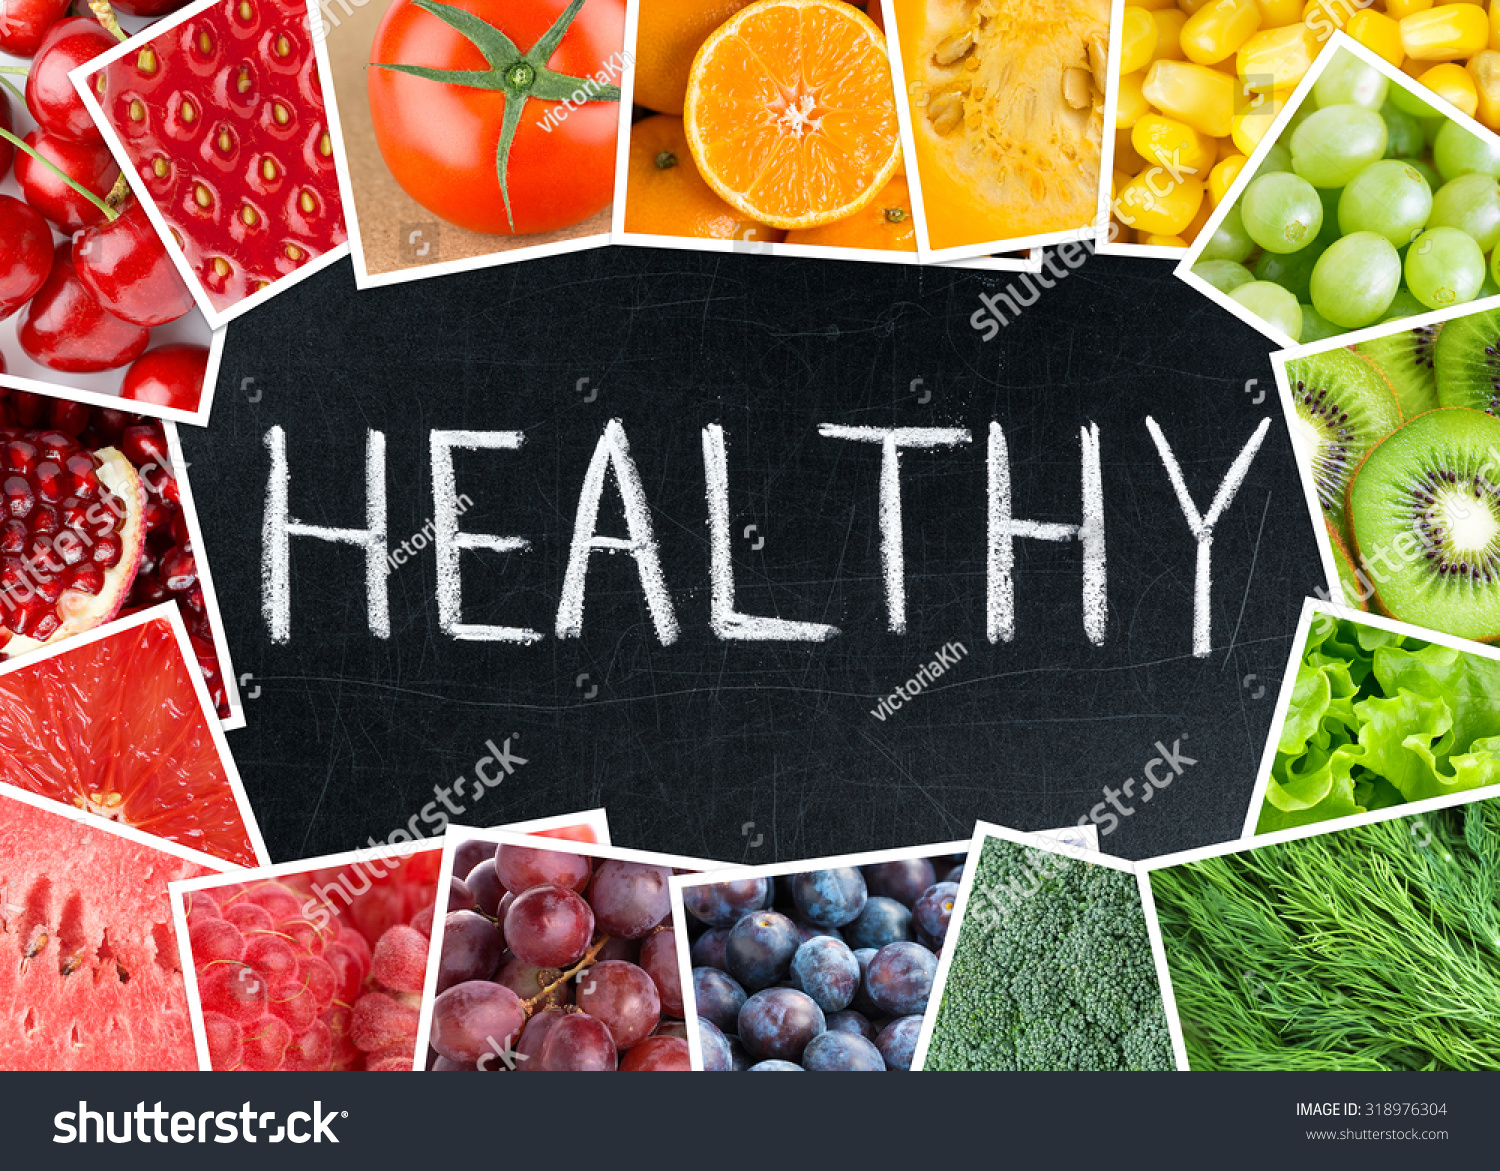 Healthy fresh color food. Fruits and vegetables concept #318976304